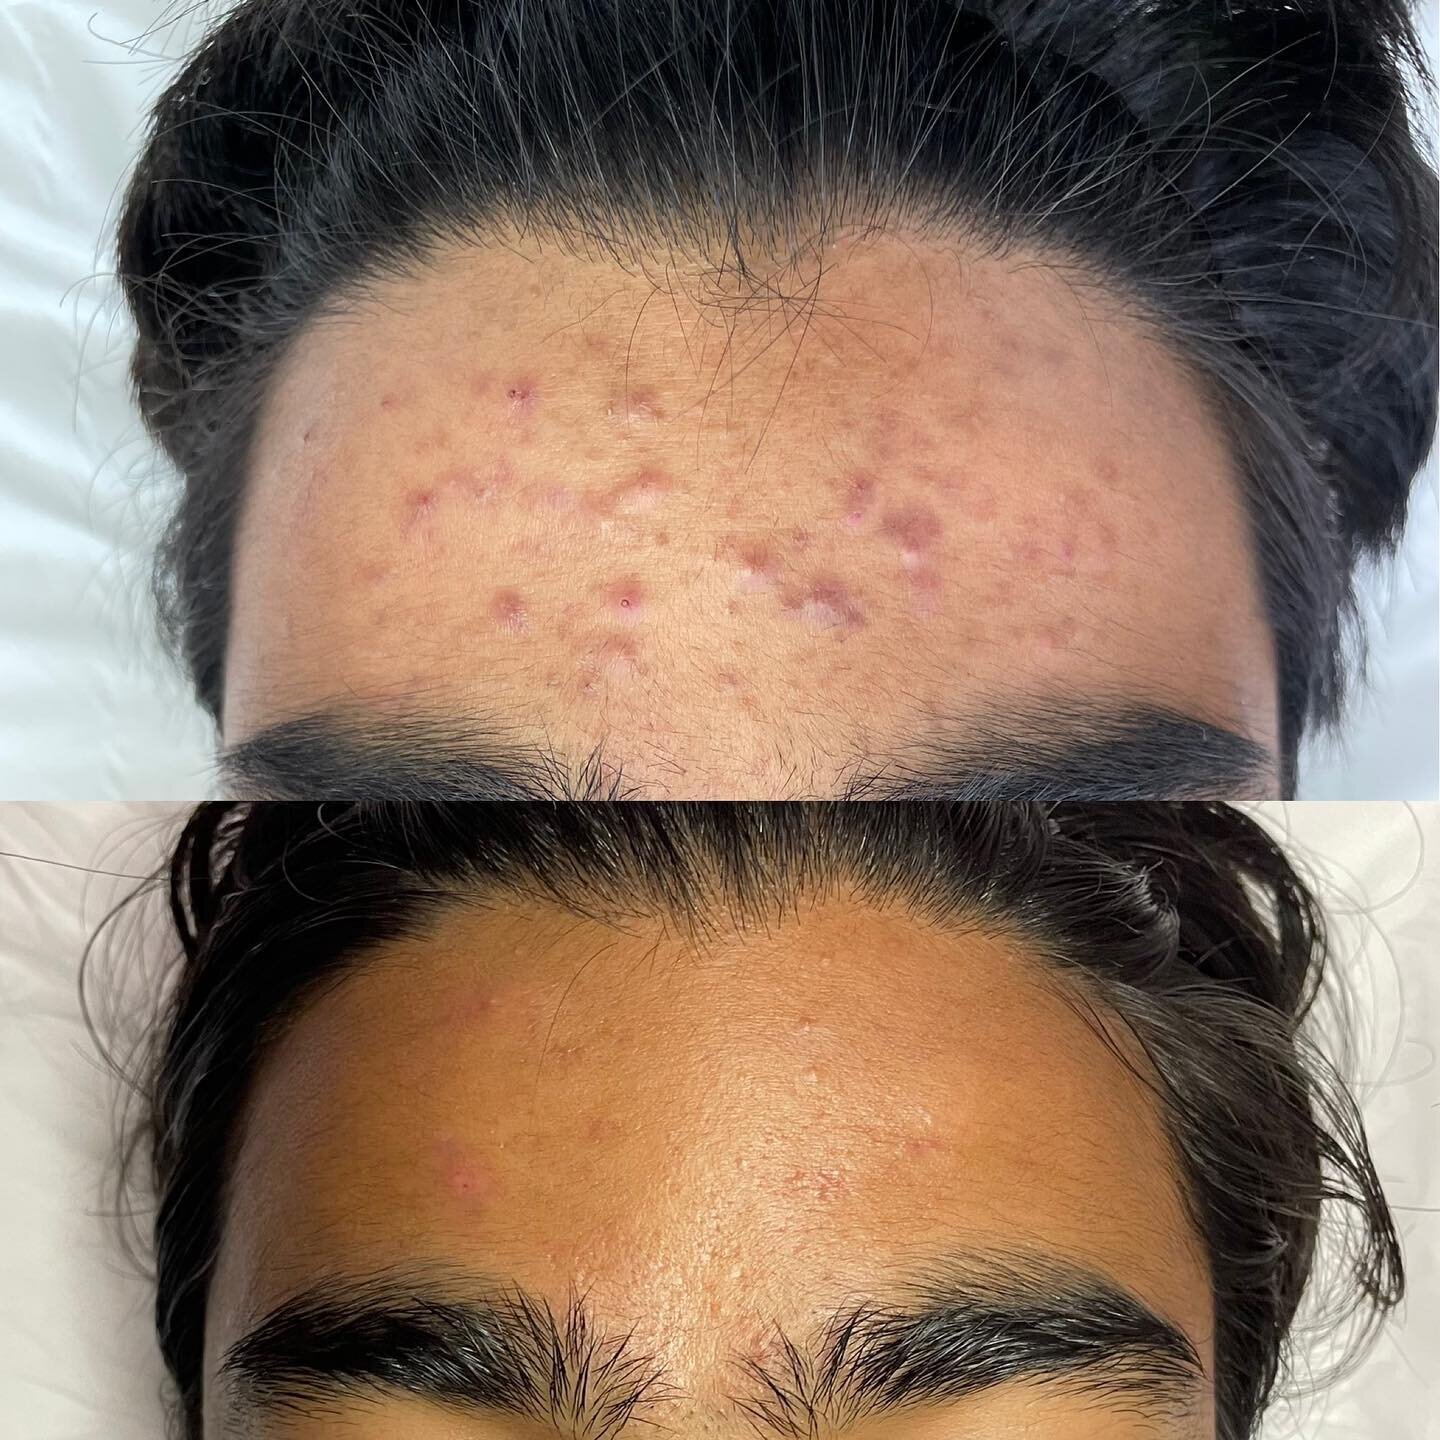 We love giving confidence back to our clients and working with them to achieve long-term skin health.🤍

The most common types of pigment problem with Acne is post-inflammatory hyperpigmentation. This occurs skin injury in the area where pustules, bu